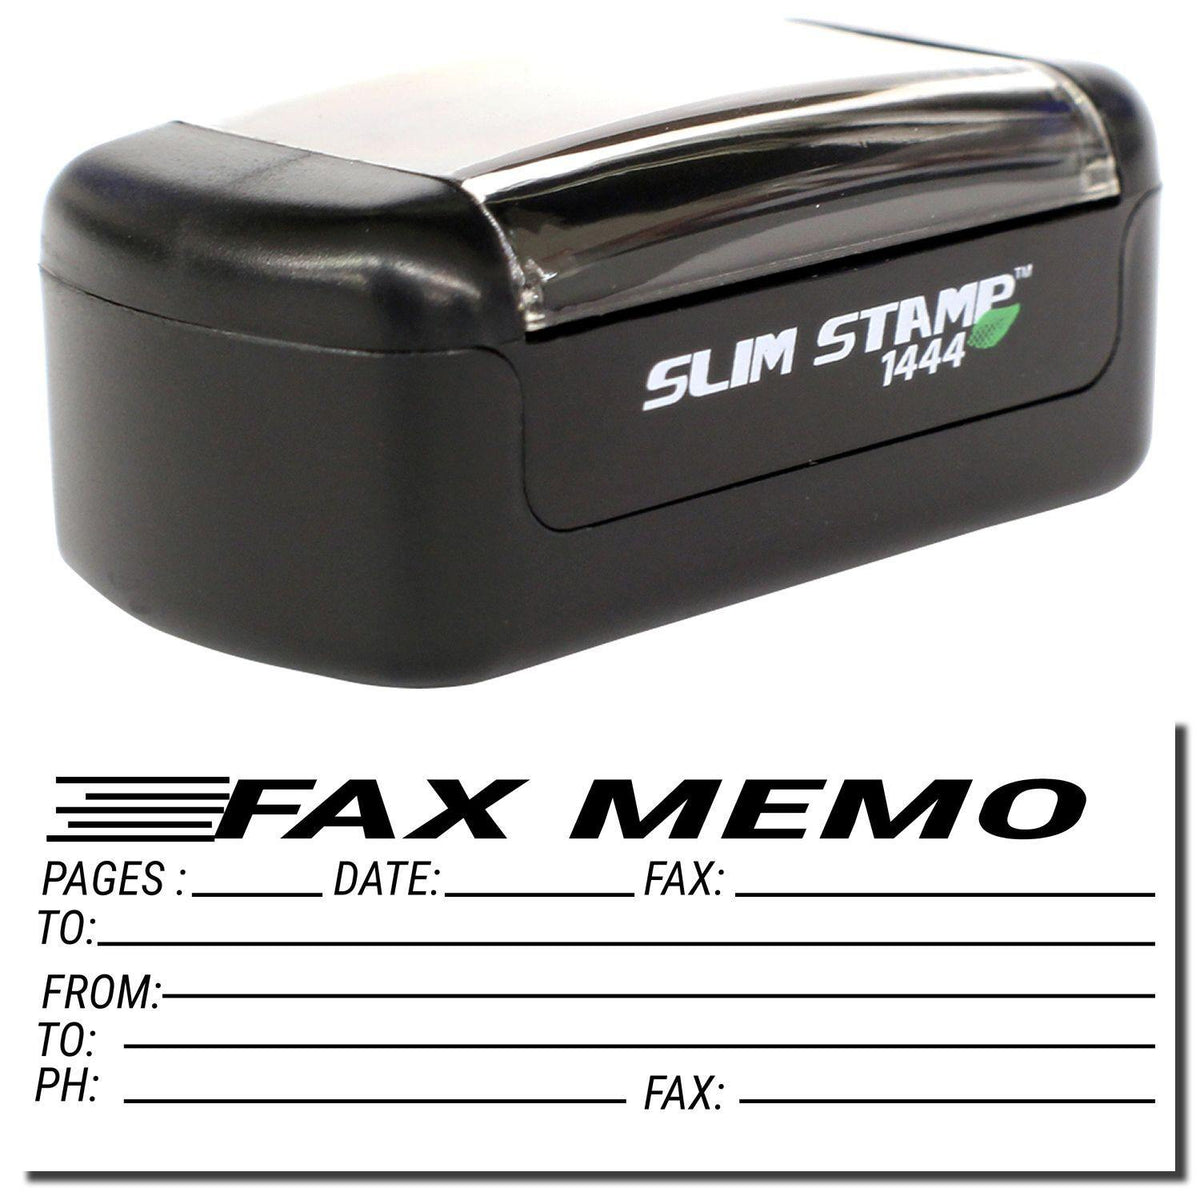 A stock office pre-inked stamp with a stamped image showing how the text &quot;FAX MEMO&quot; is displayed horizontally with a form underneath for filling in various details of the fax is shown after stamping from it.